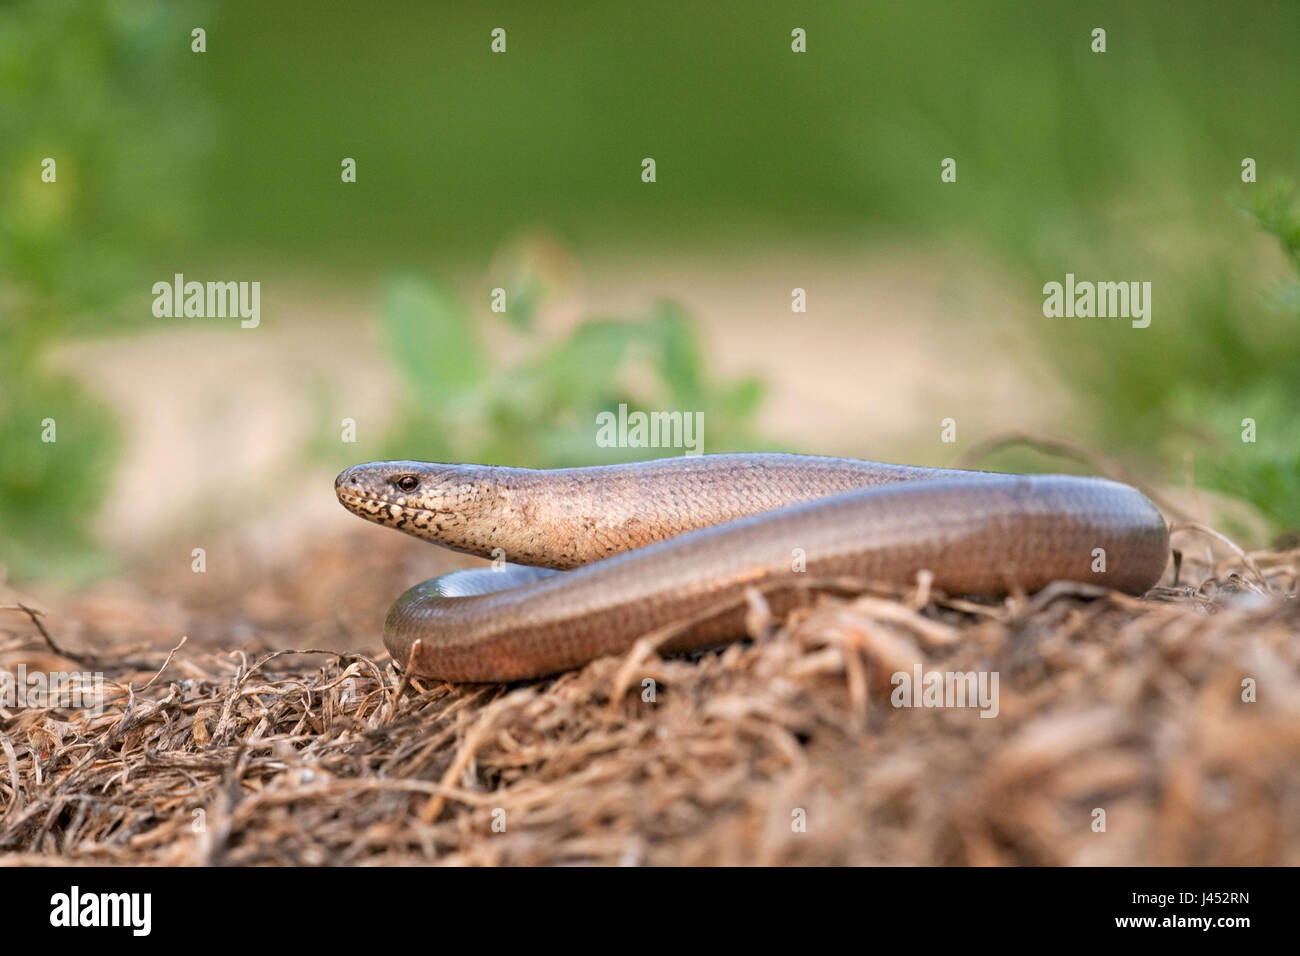 photo of a basking slow worm on a compost heap with a green background Stock Photo